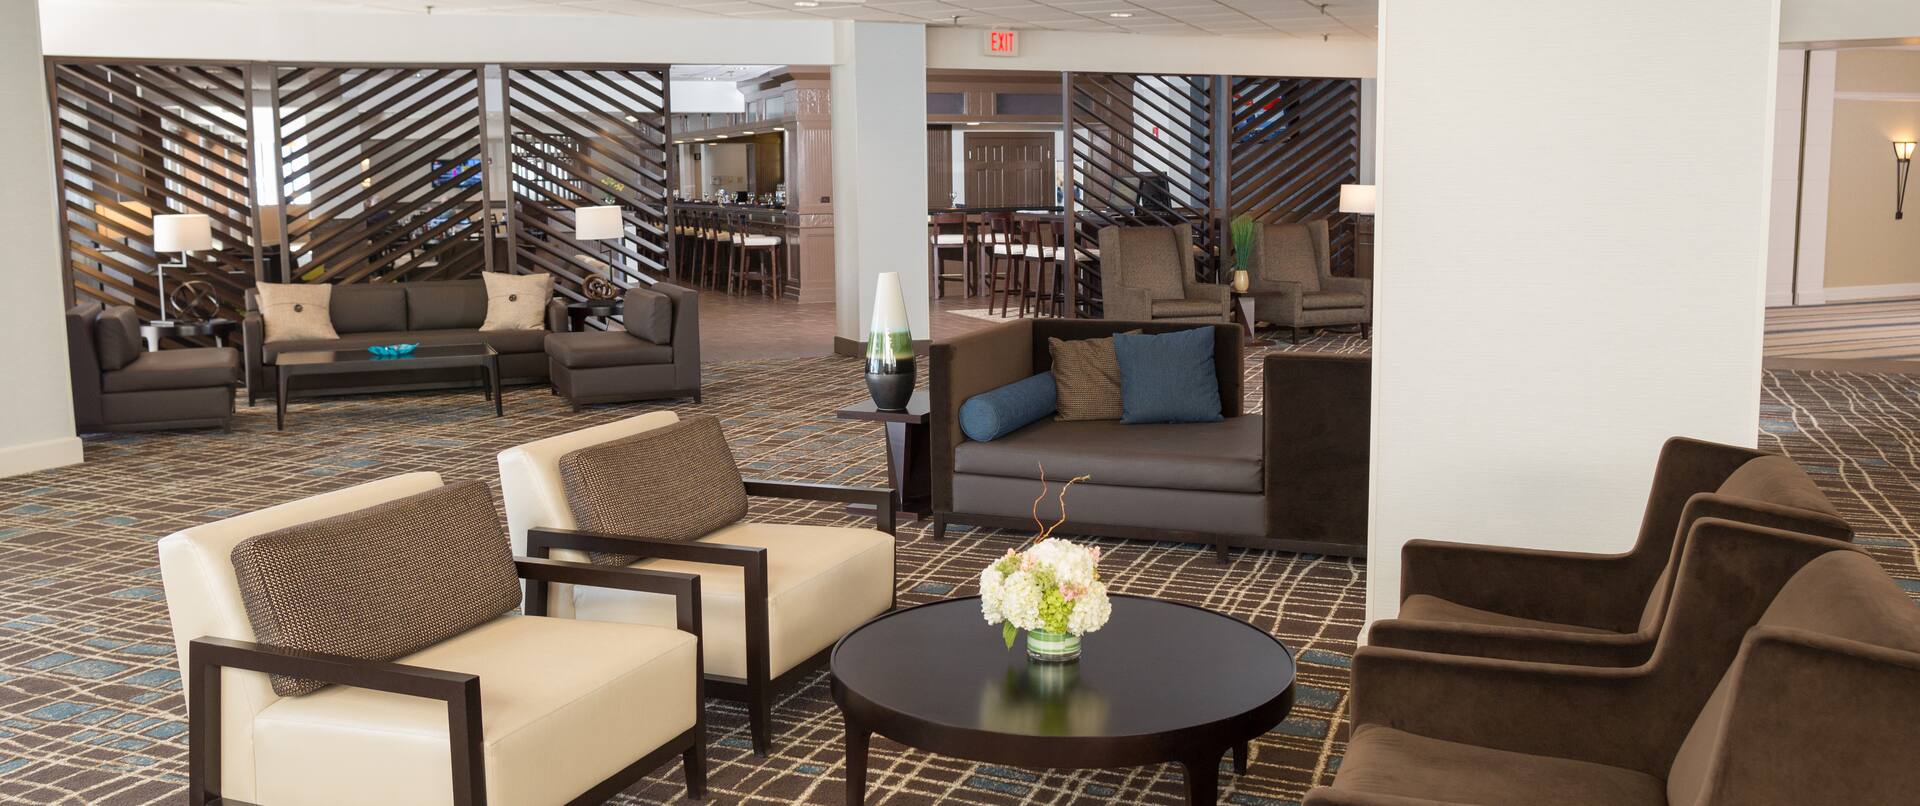 Soft Seating Around Tables and Illuminated Lamps in Lobby Lounge